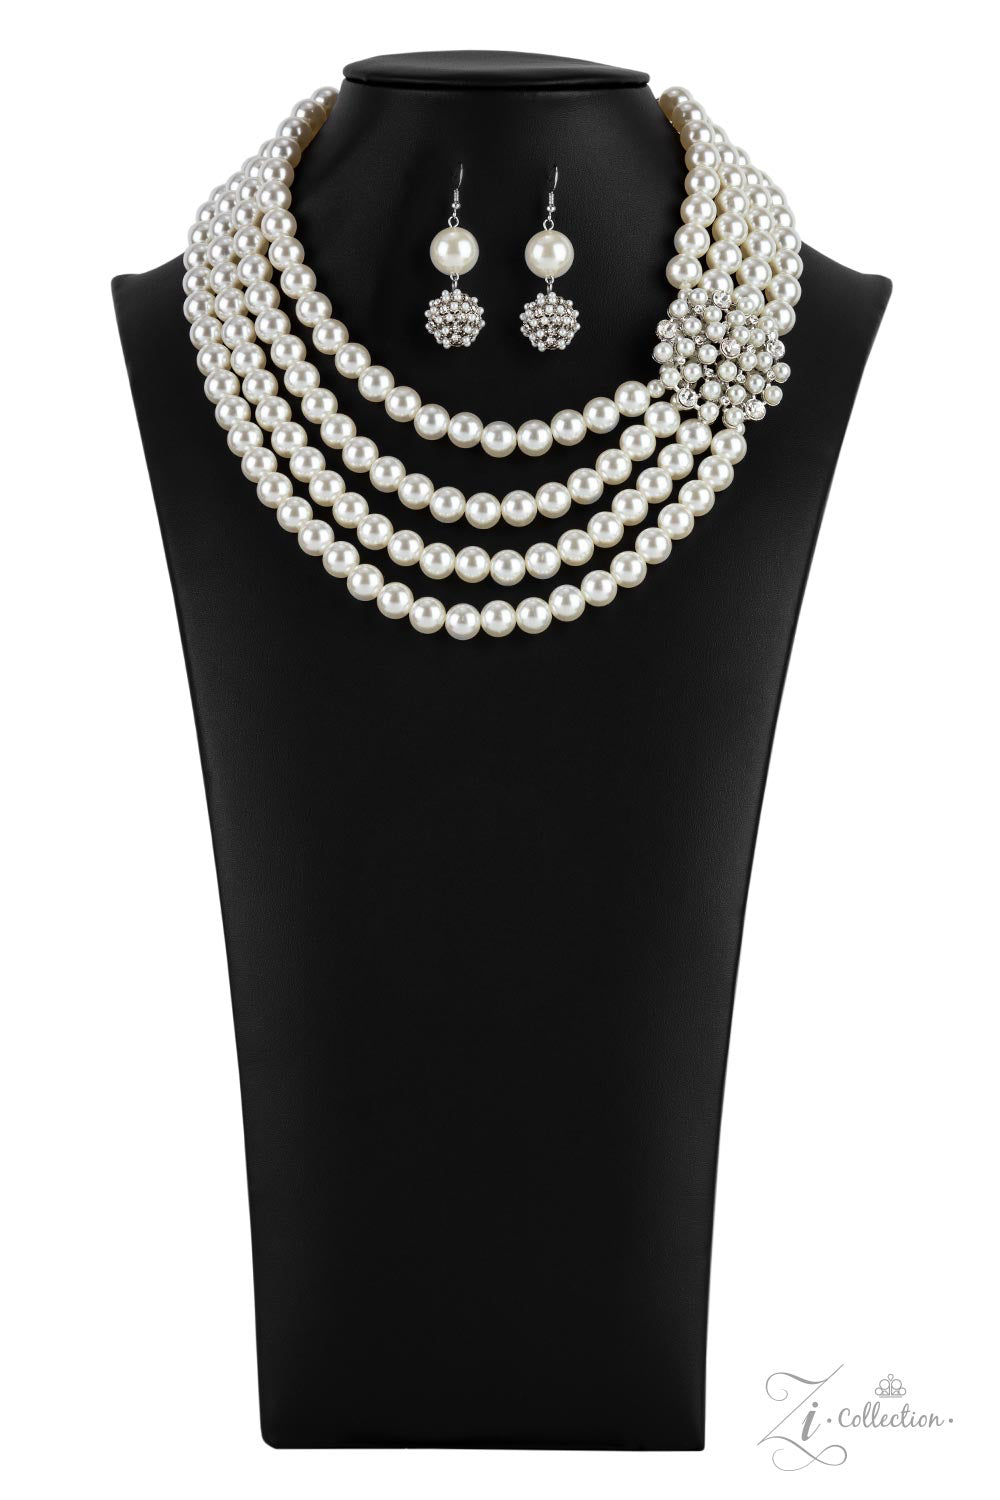 Inspired by royalty, an elegant explosion of classic white rhinestones and timeless pearls delicately coalesces into a vintage brooch. The refined ornament delicately holds together strands of oversized pearls, creating romantically regal layers below the collar. Features an adjustable clasp closure.